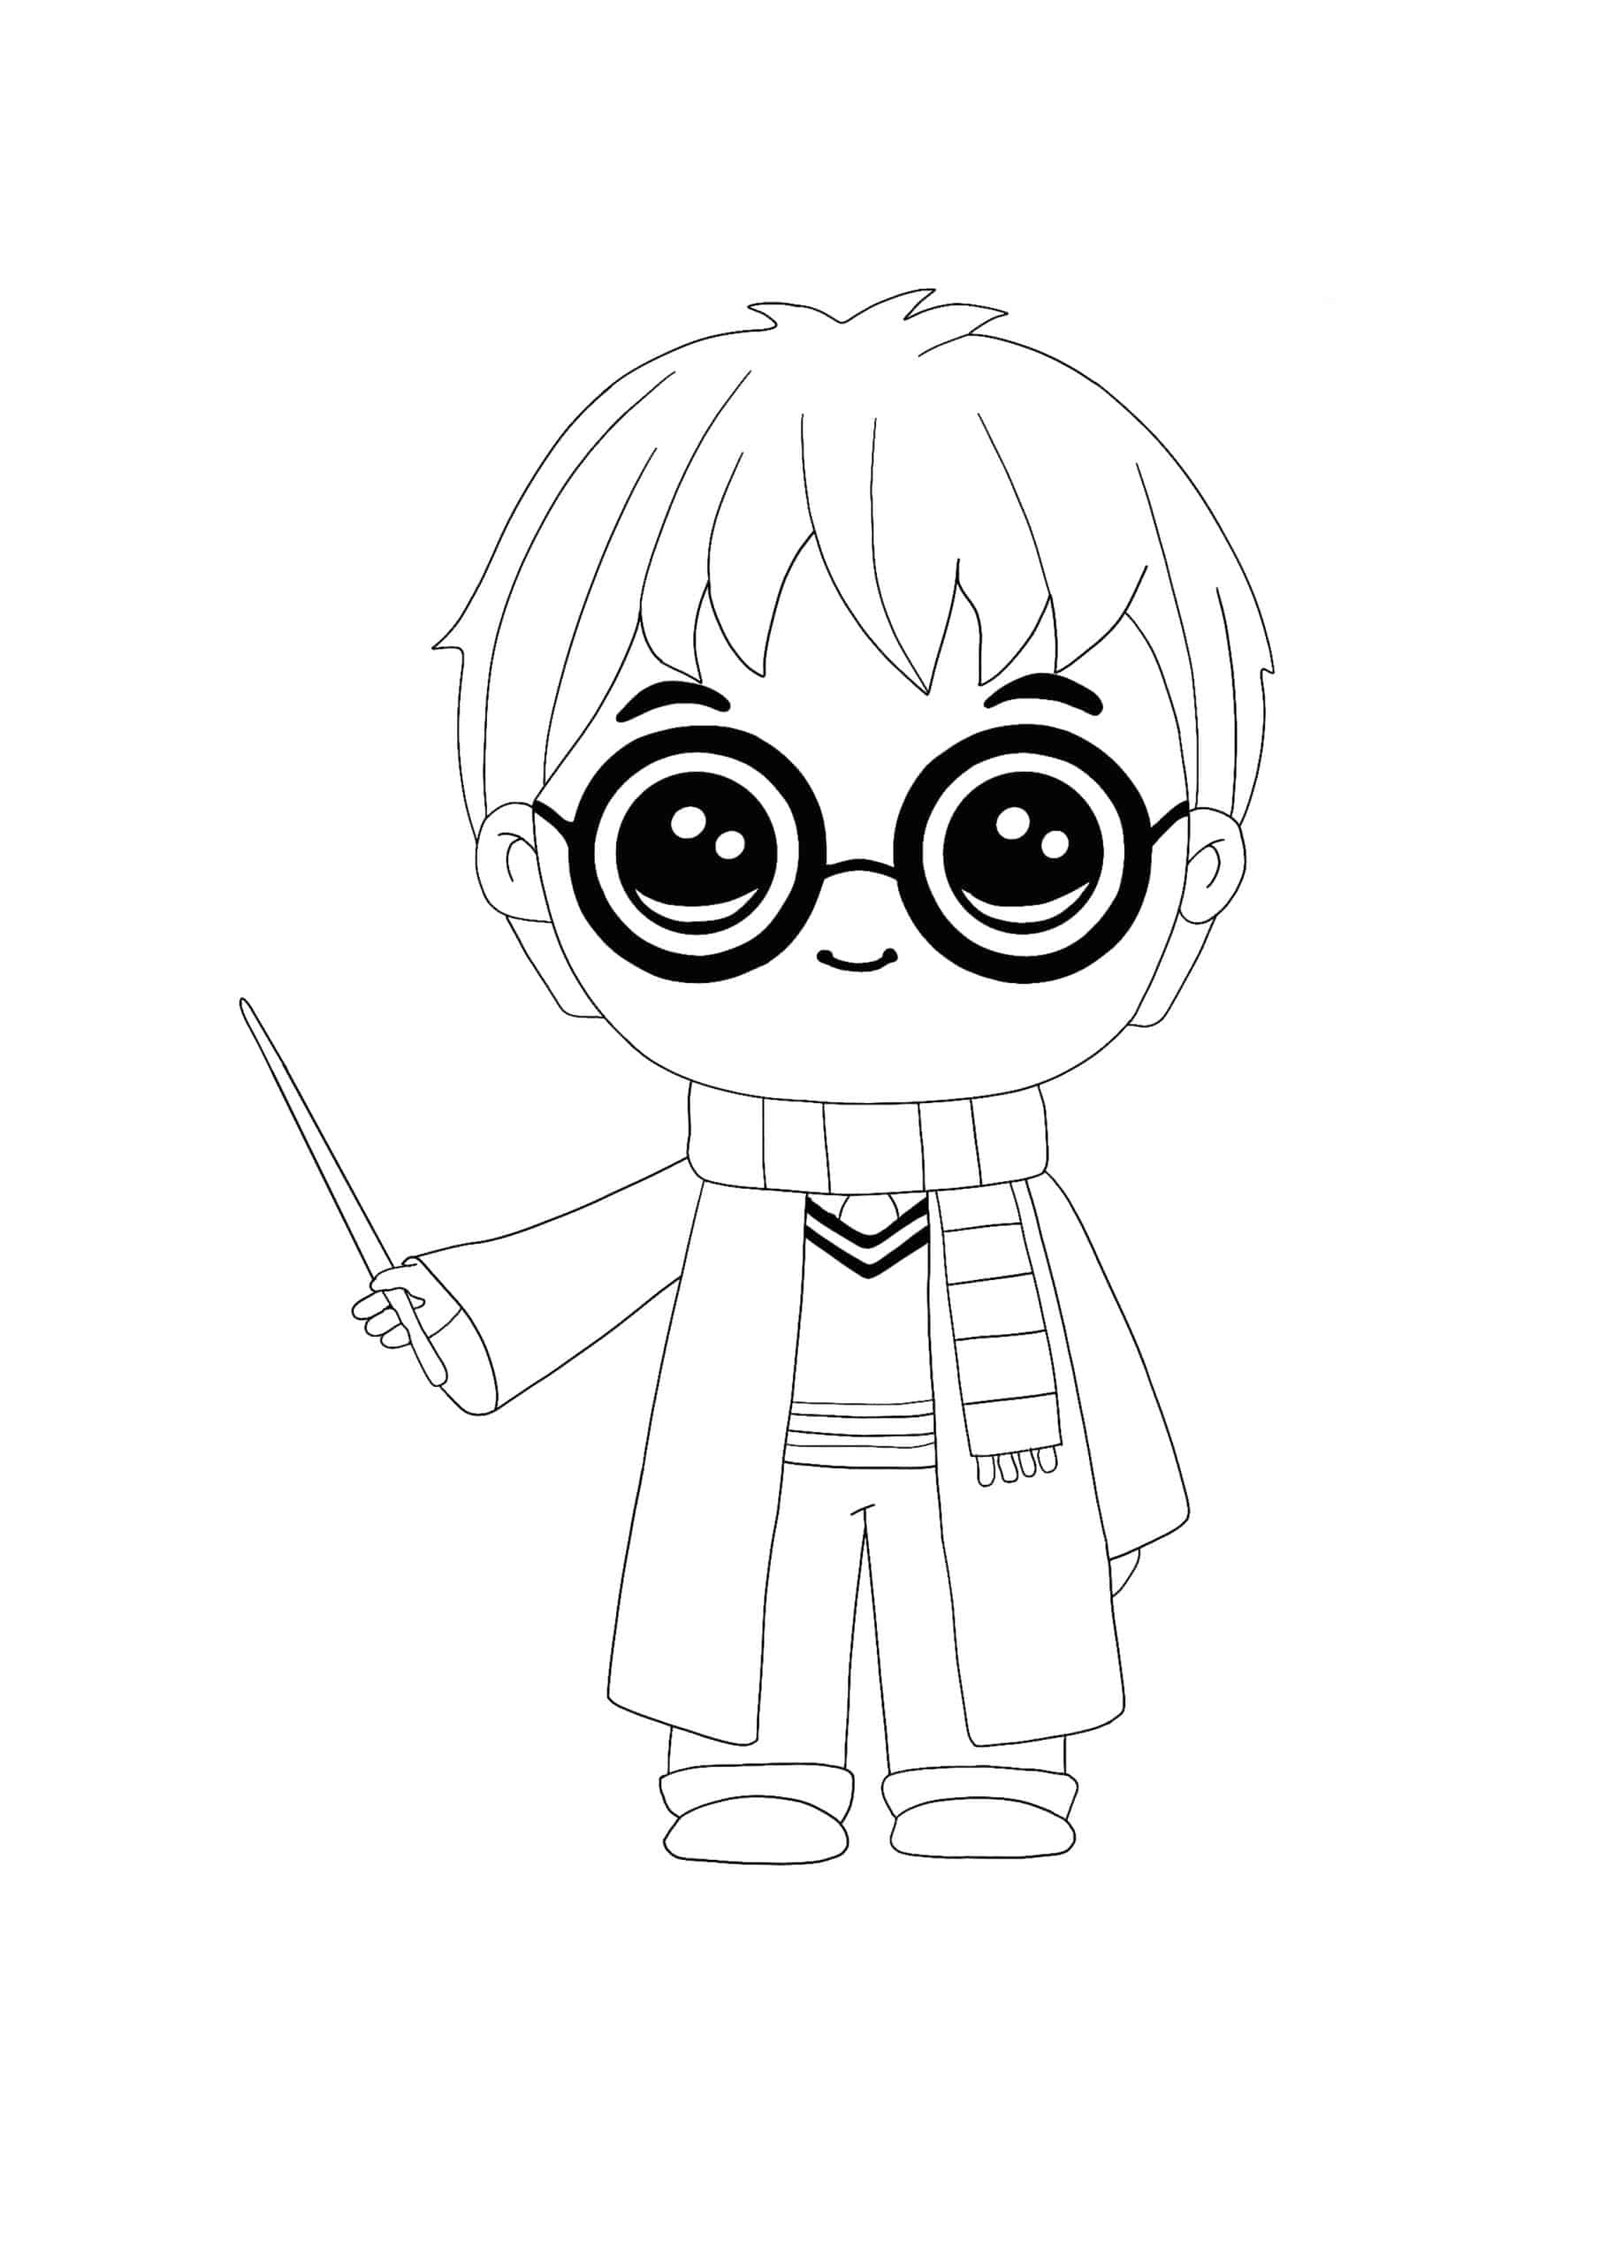 Kawaii harry potter coloring pages